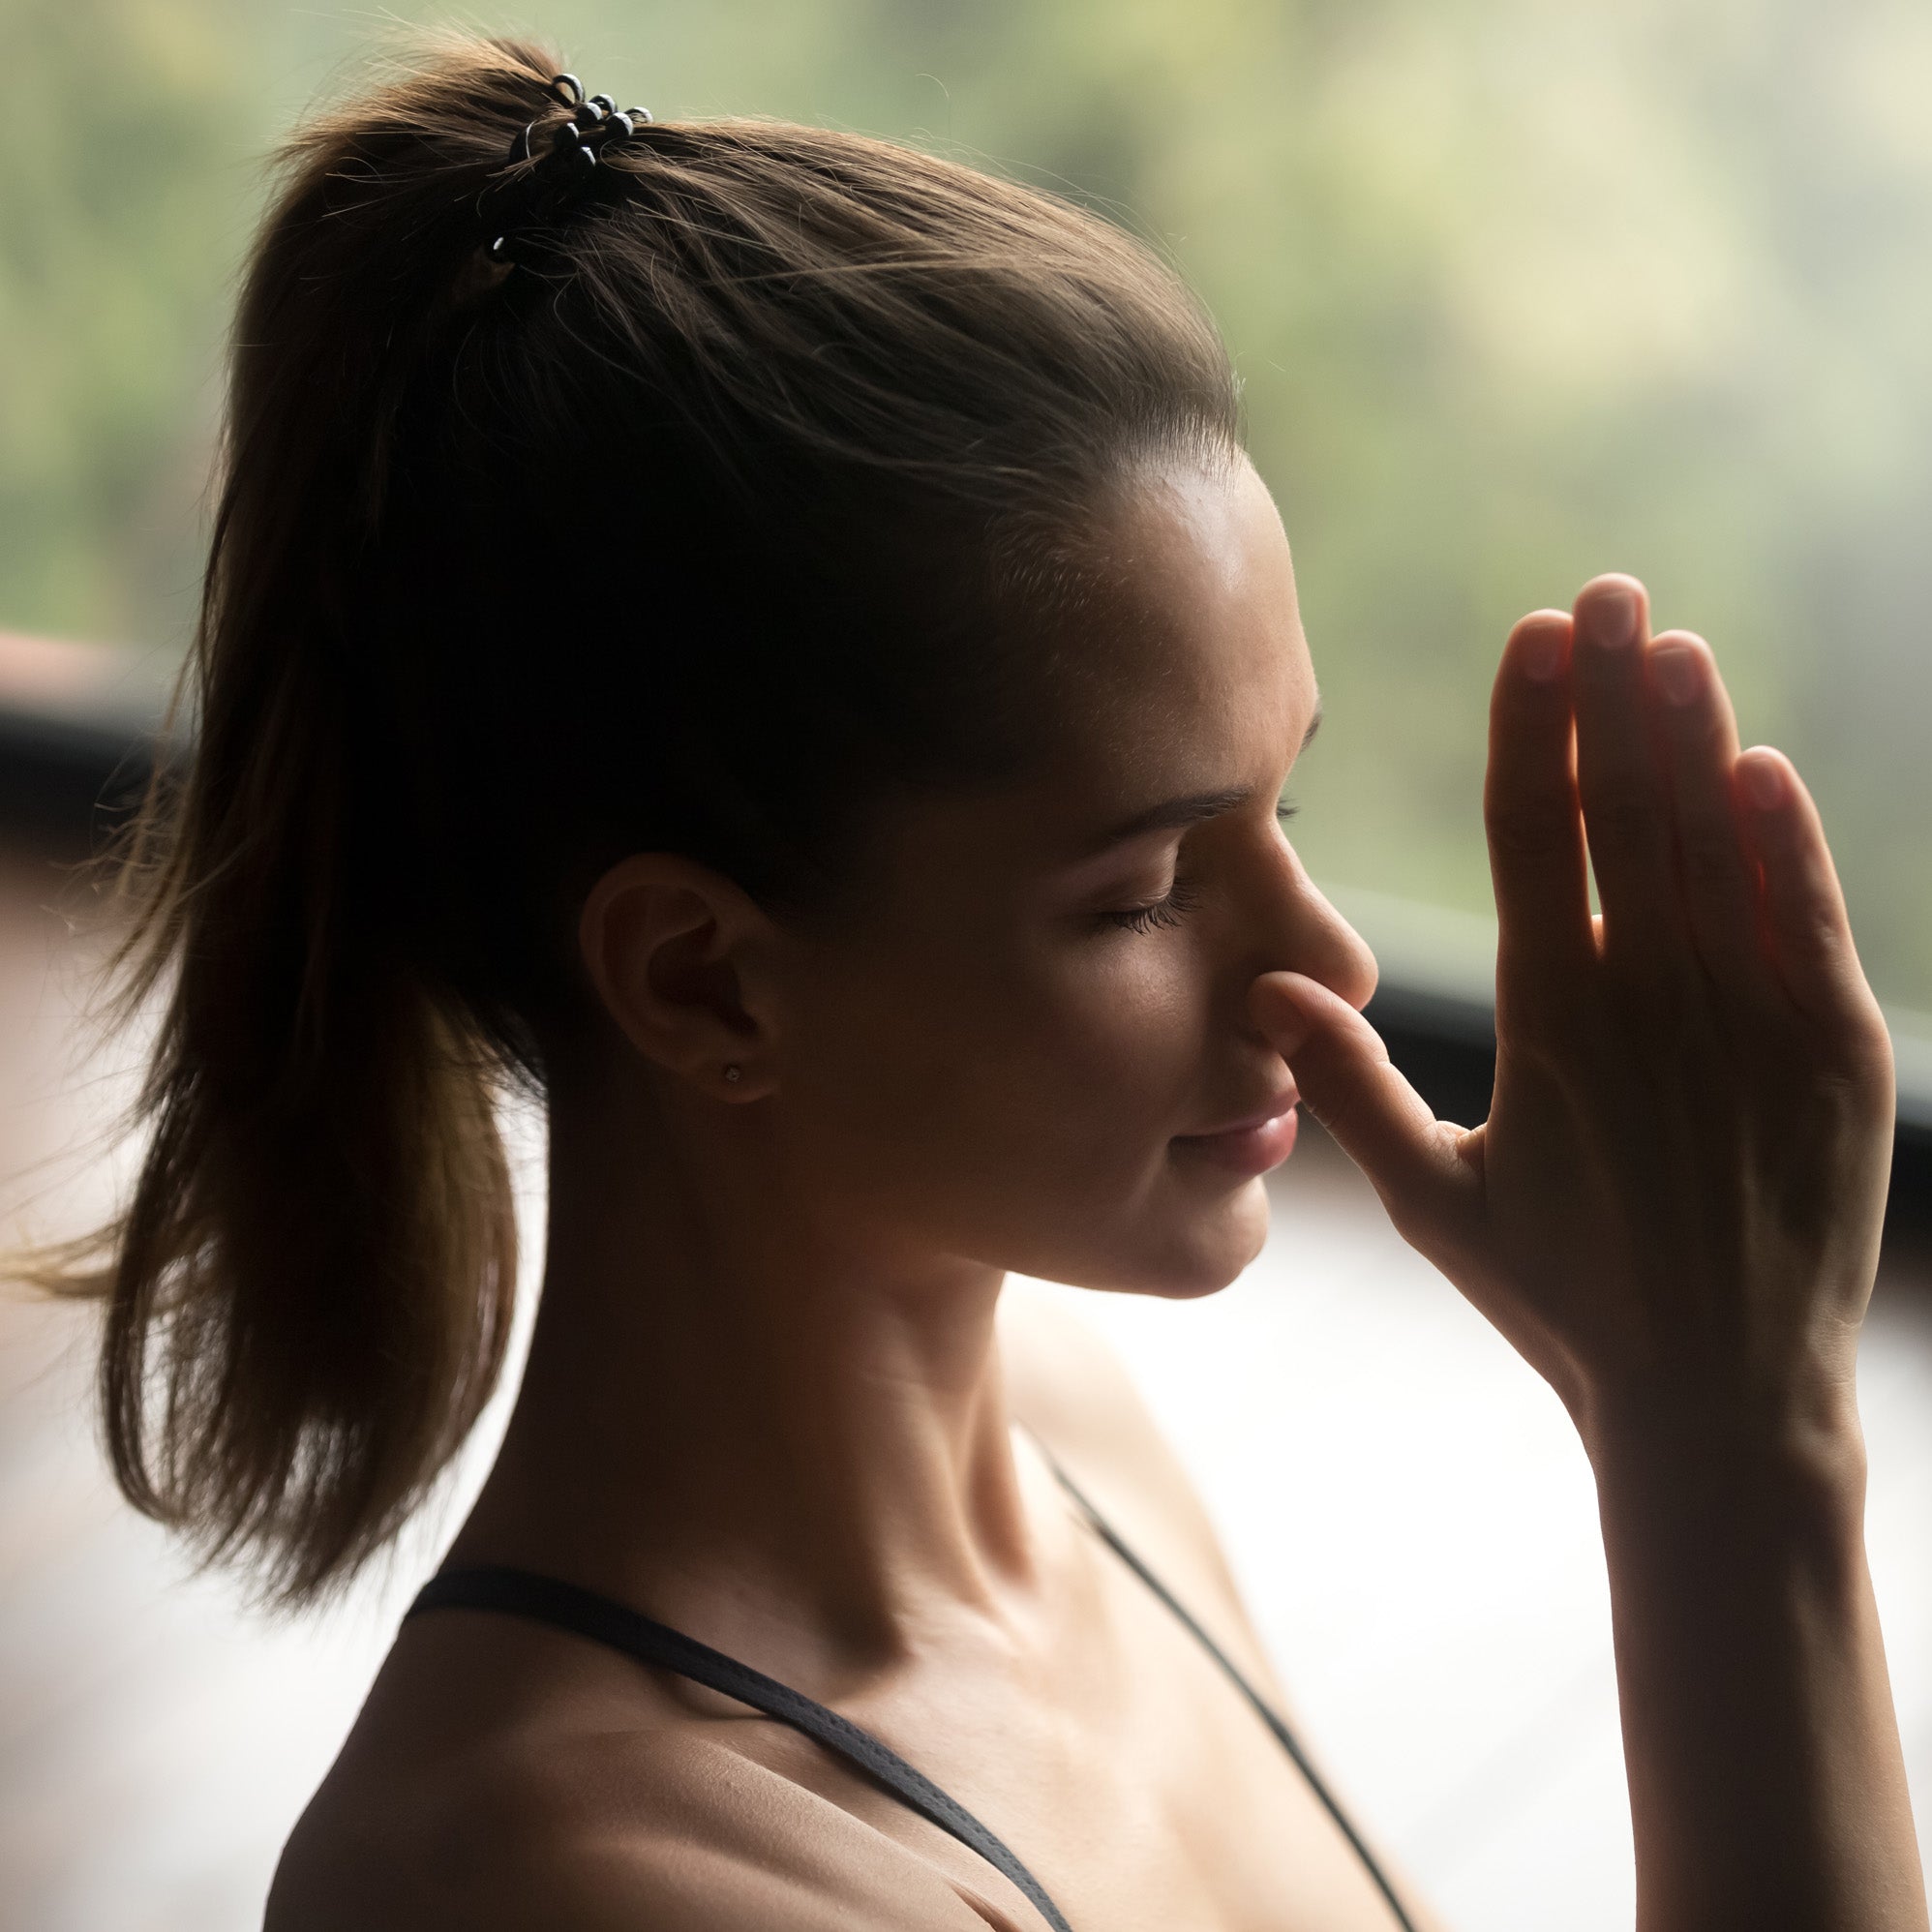 3 Breathing Exercises To Decrease Stress & Boost Recovery